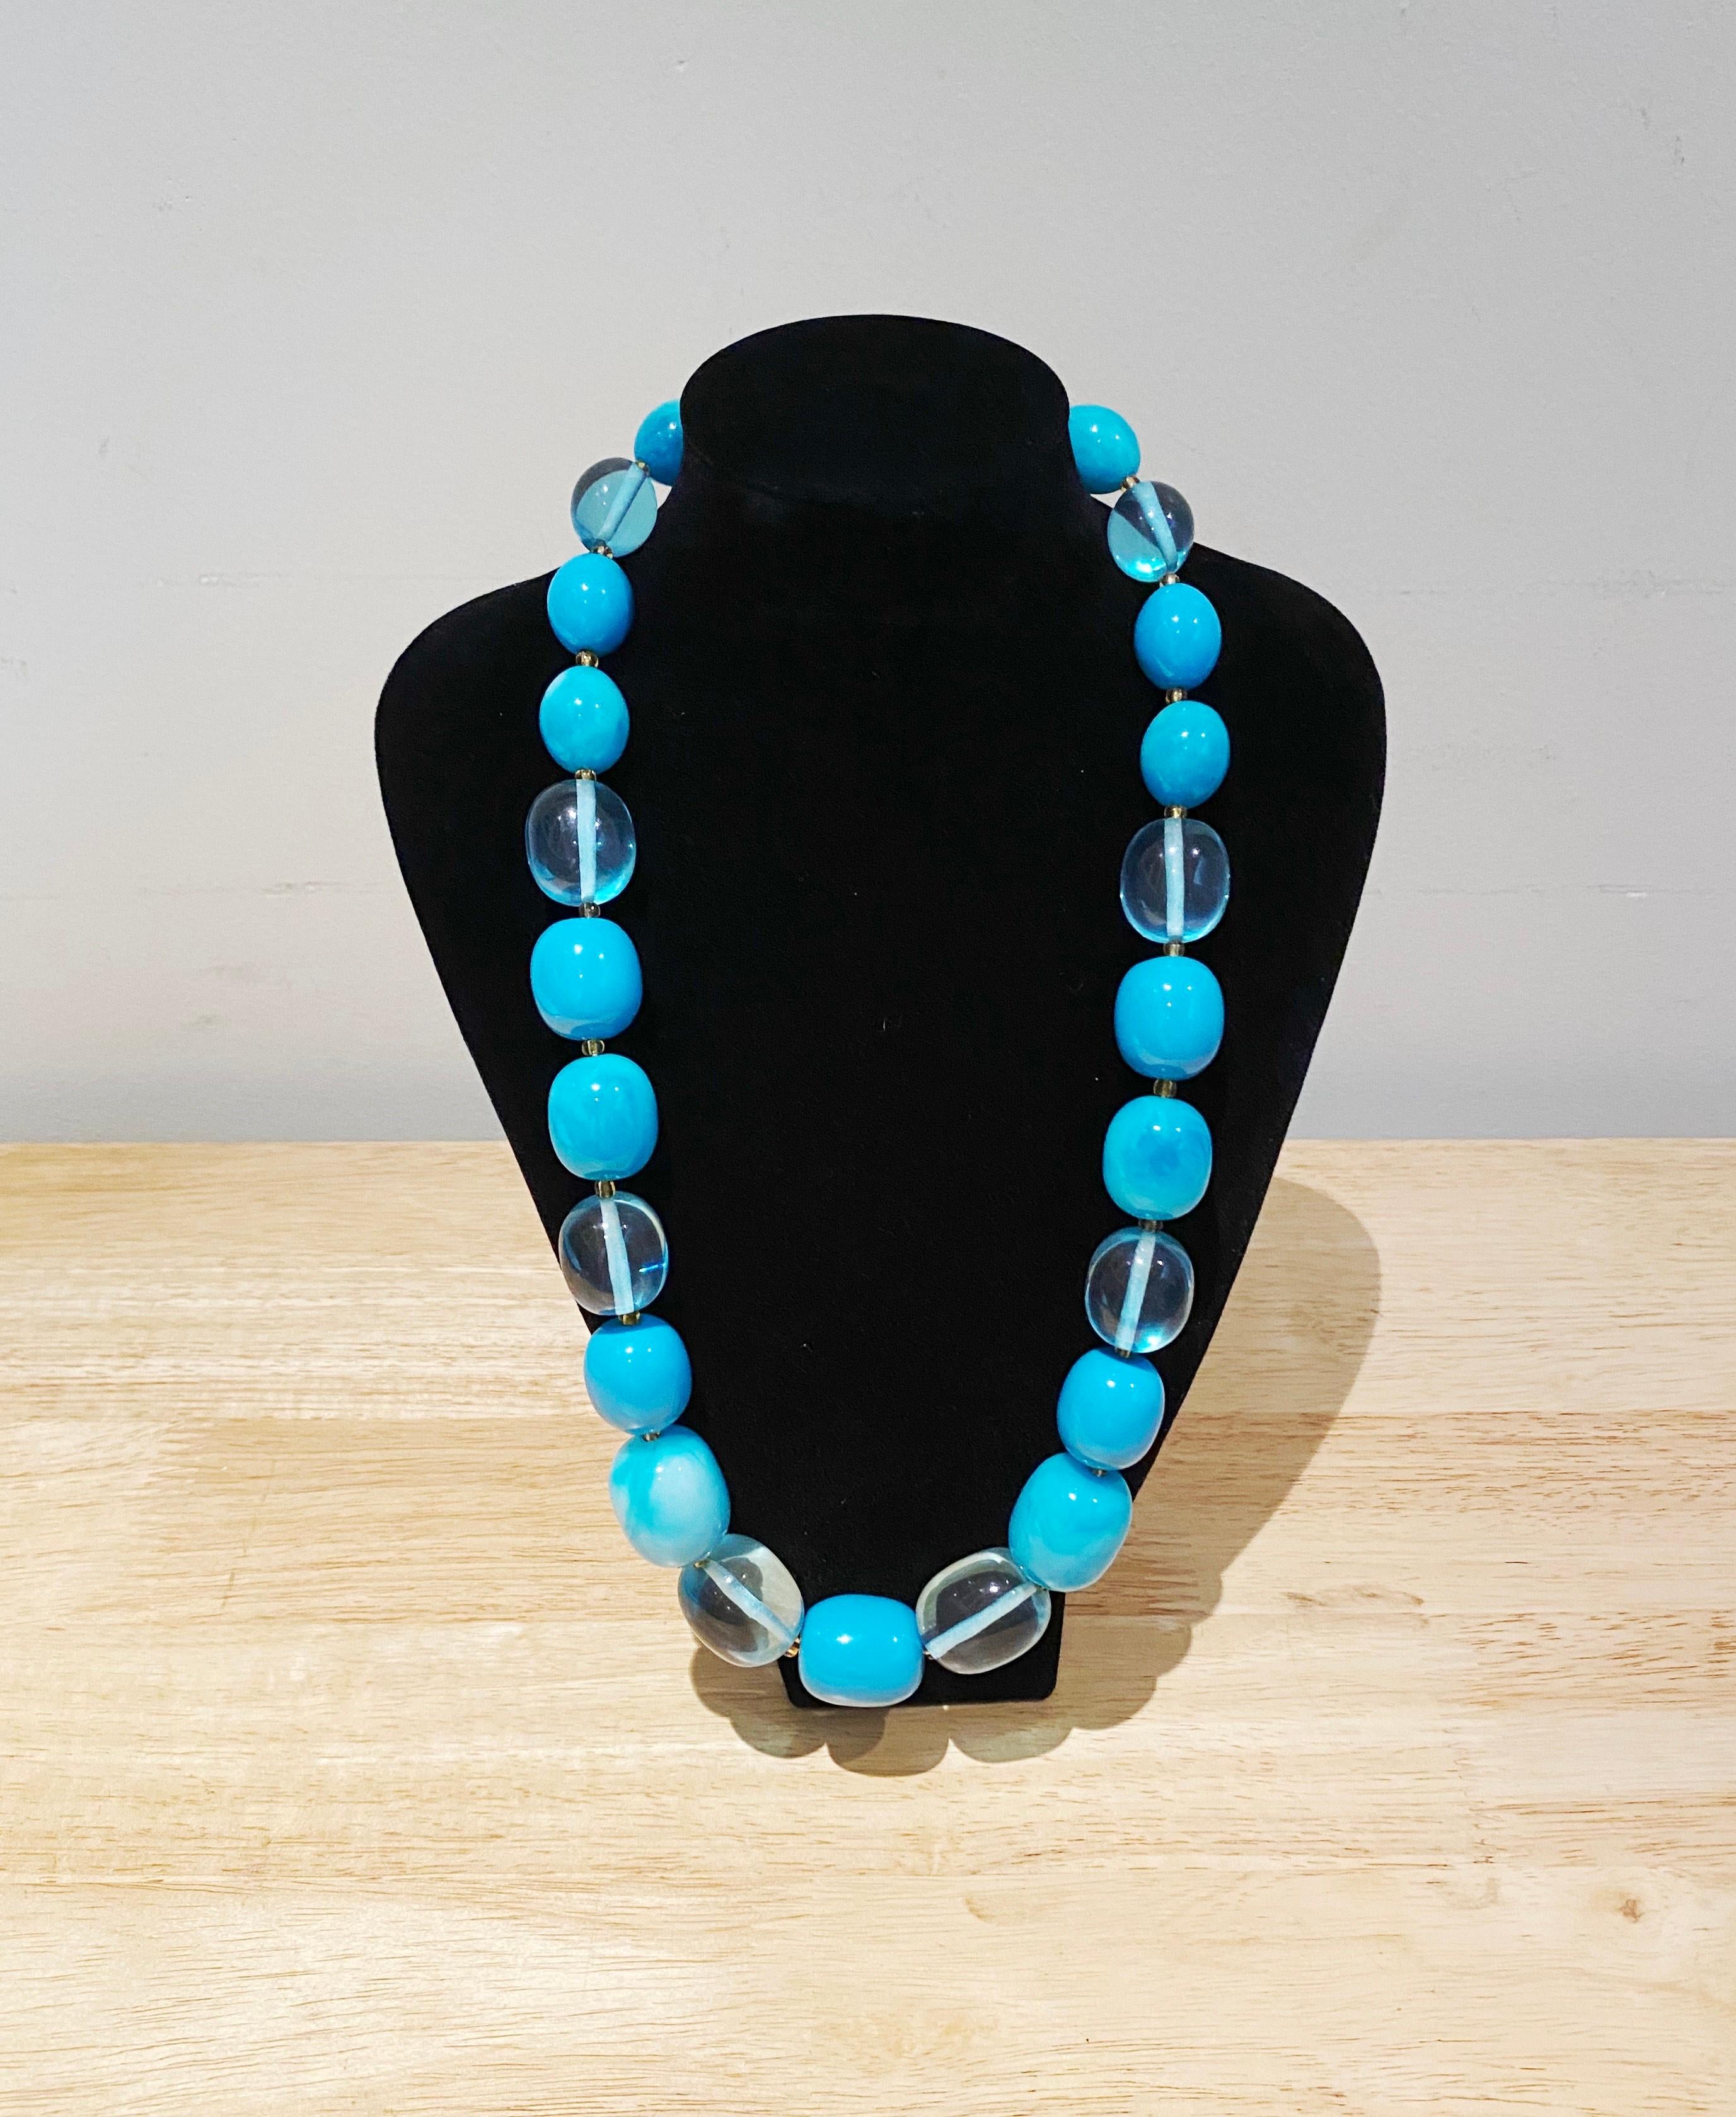 A beautiful shimmery turquoise lucite bead statement necklace by couture designer, Oscar de la Renta. Circa, 1990s.  Adjustable in length. This necklace is in excellent condition and a wonderful collectors item. 